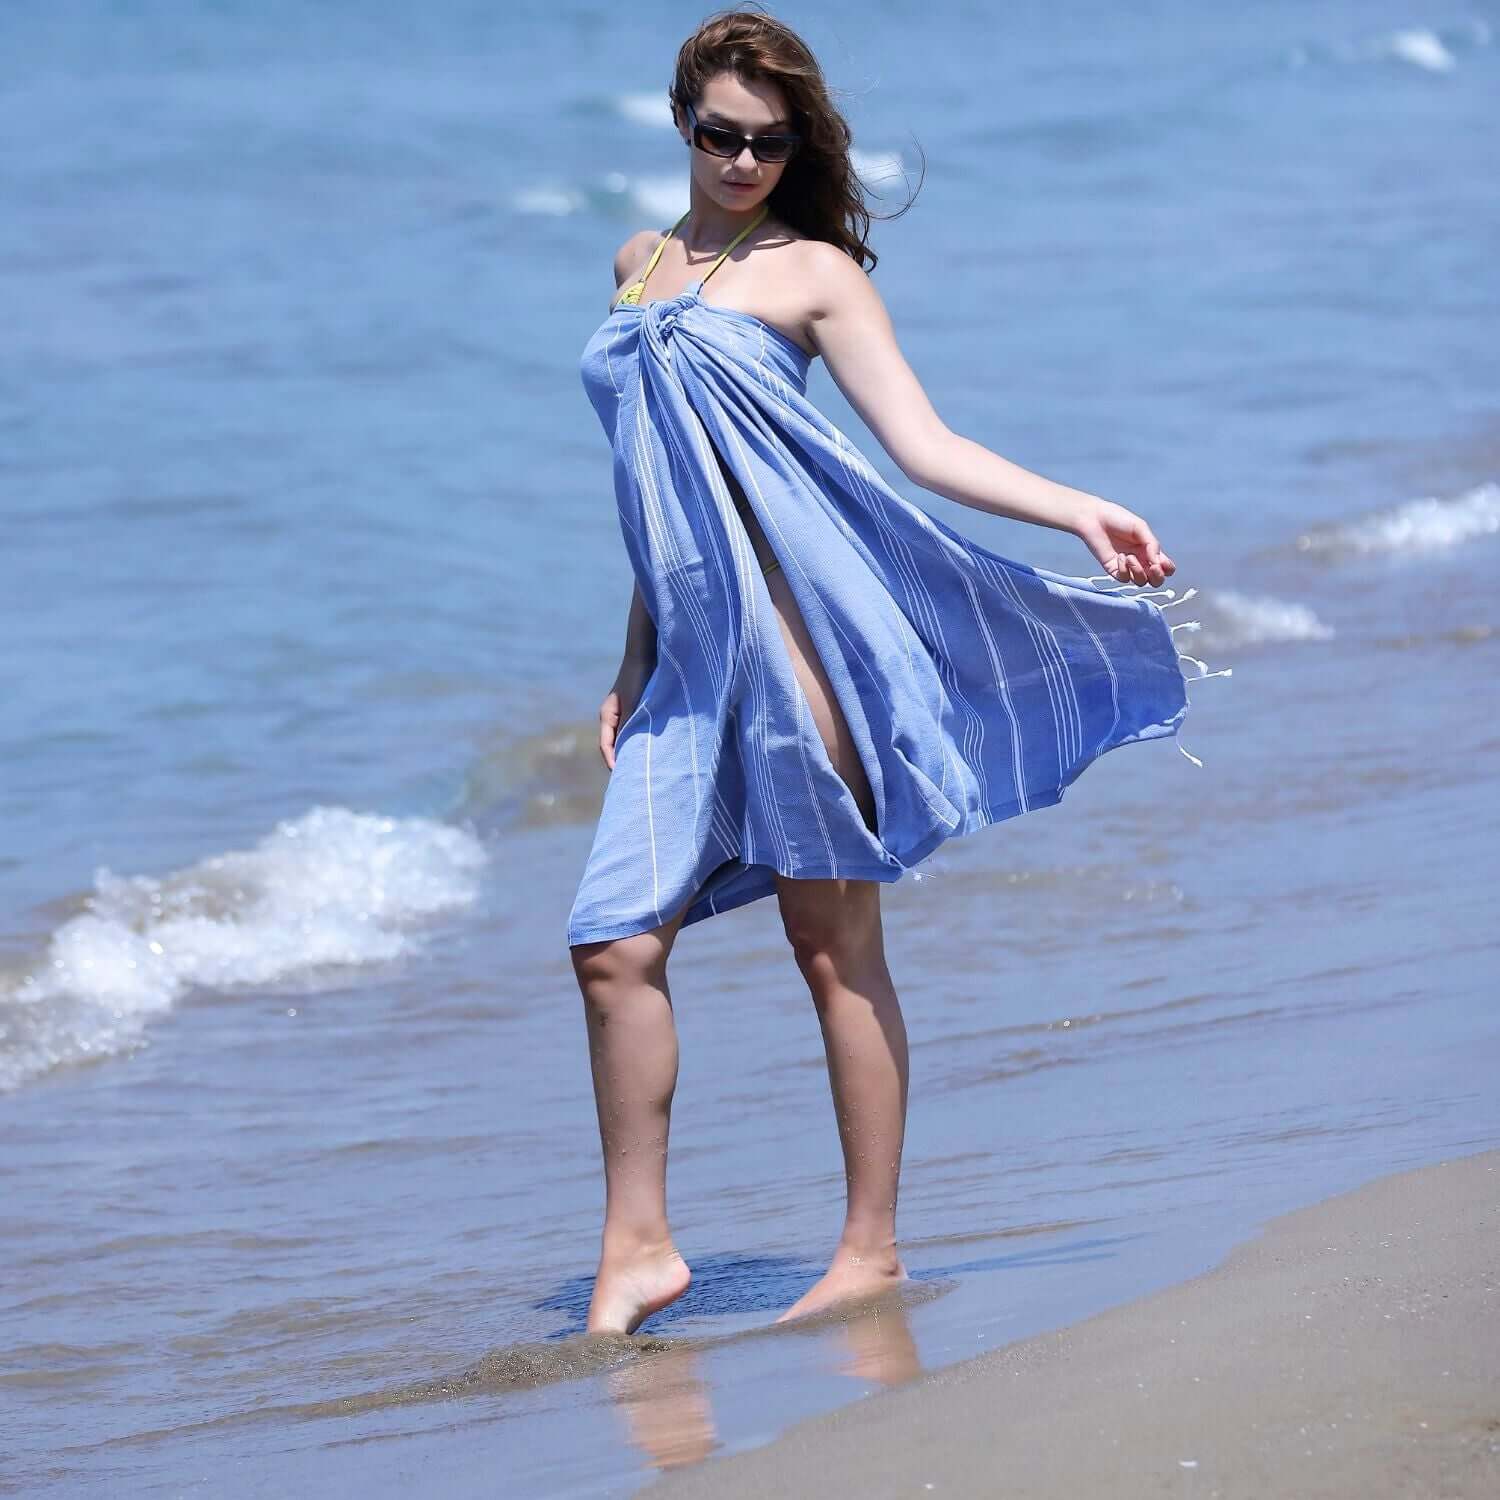 A woman wearing sunglasses stands by the shoreline, draped in a dark blue Loom Legacy beach towel with white stripes, as waves gently lap at her feet